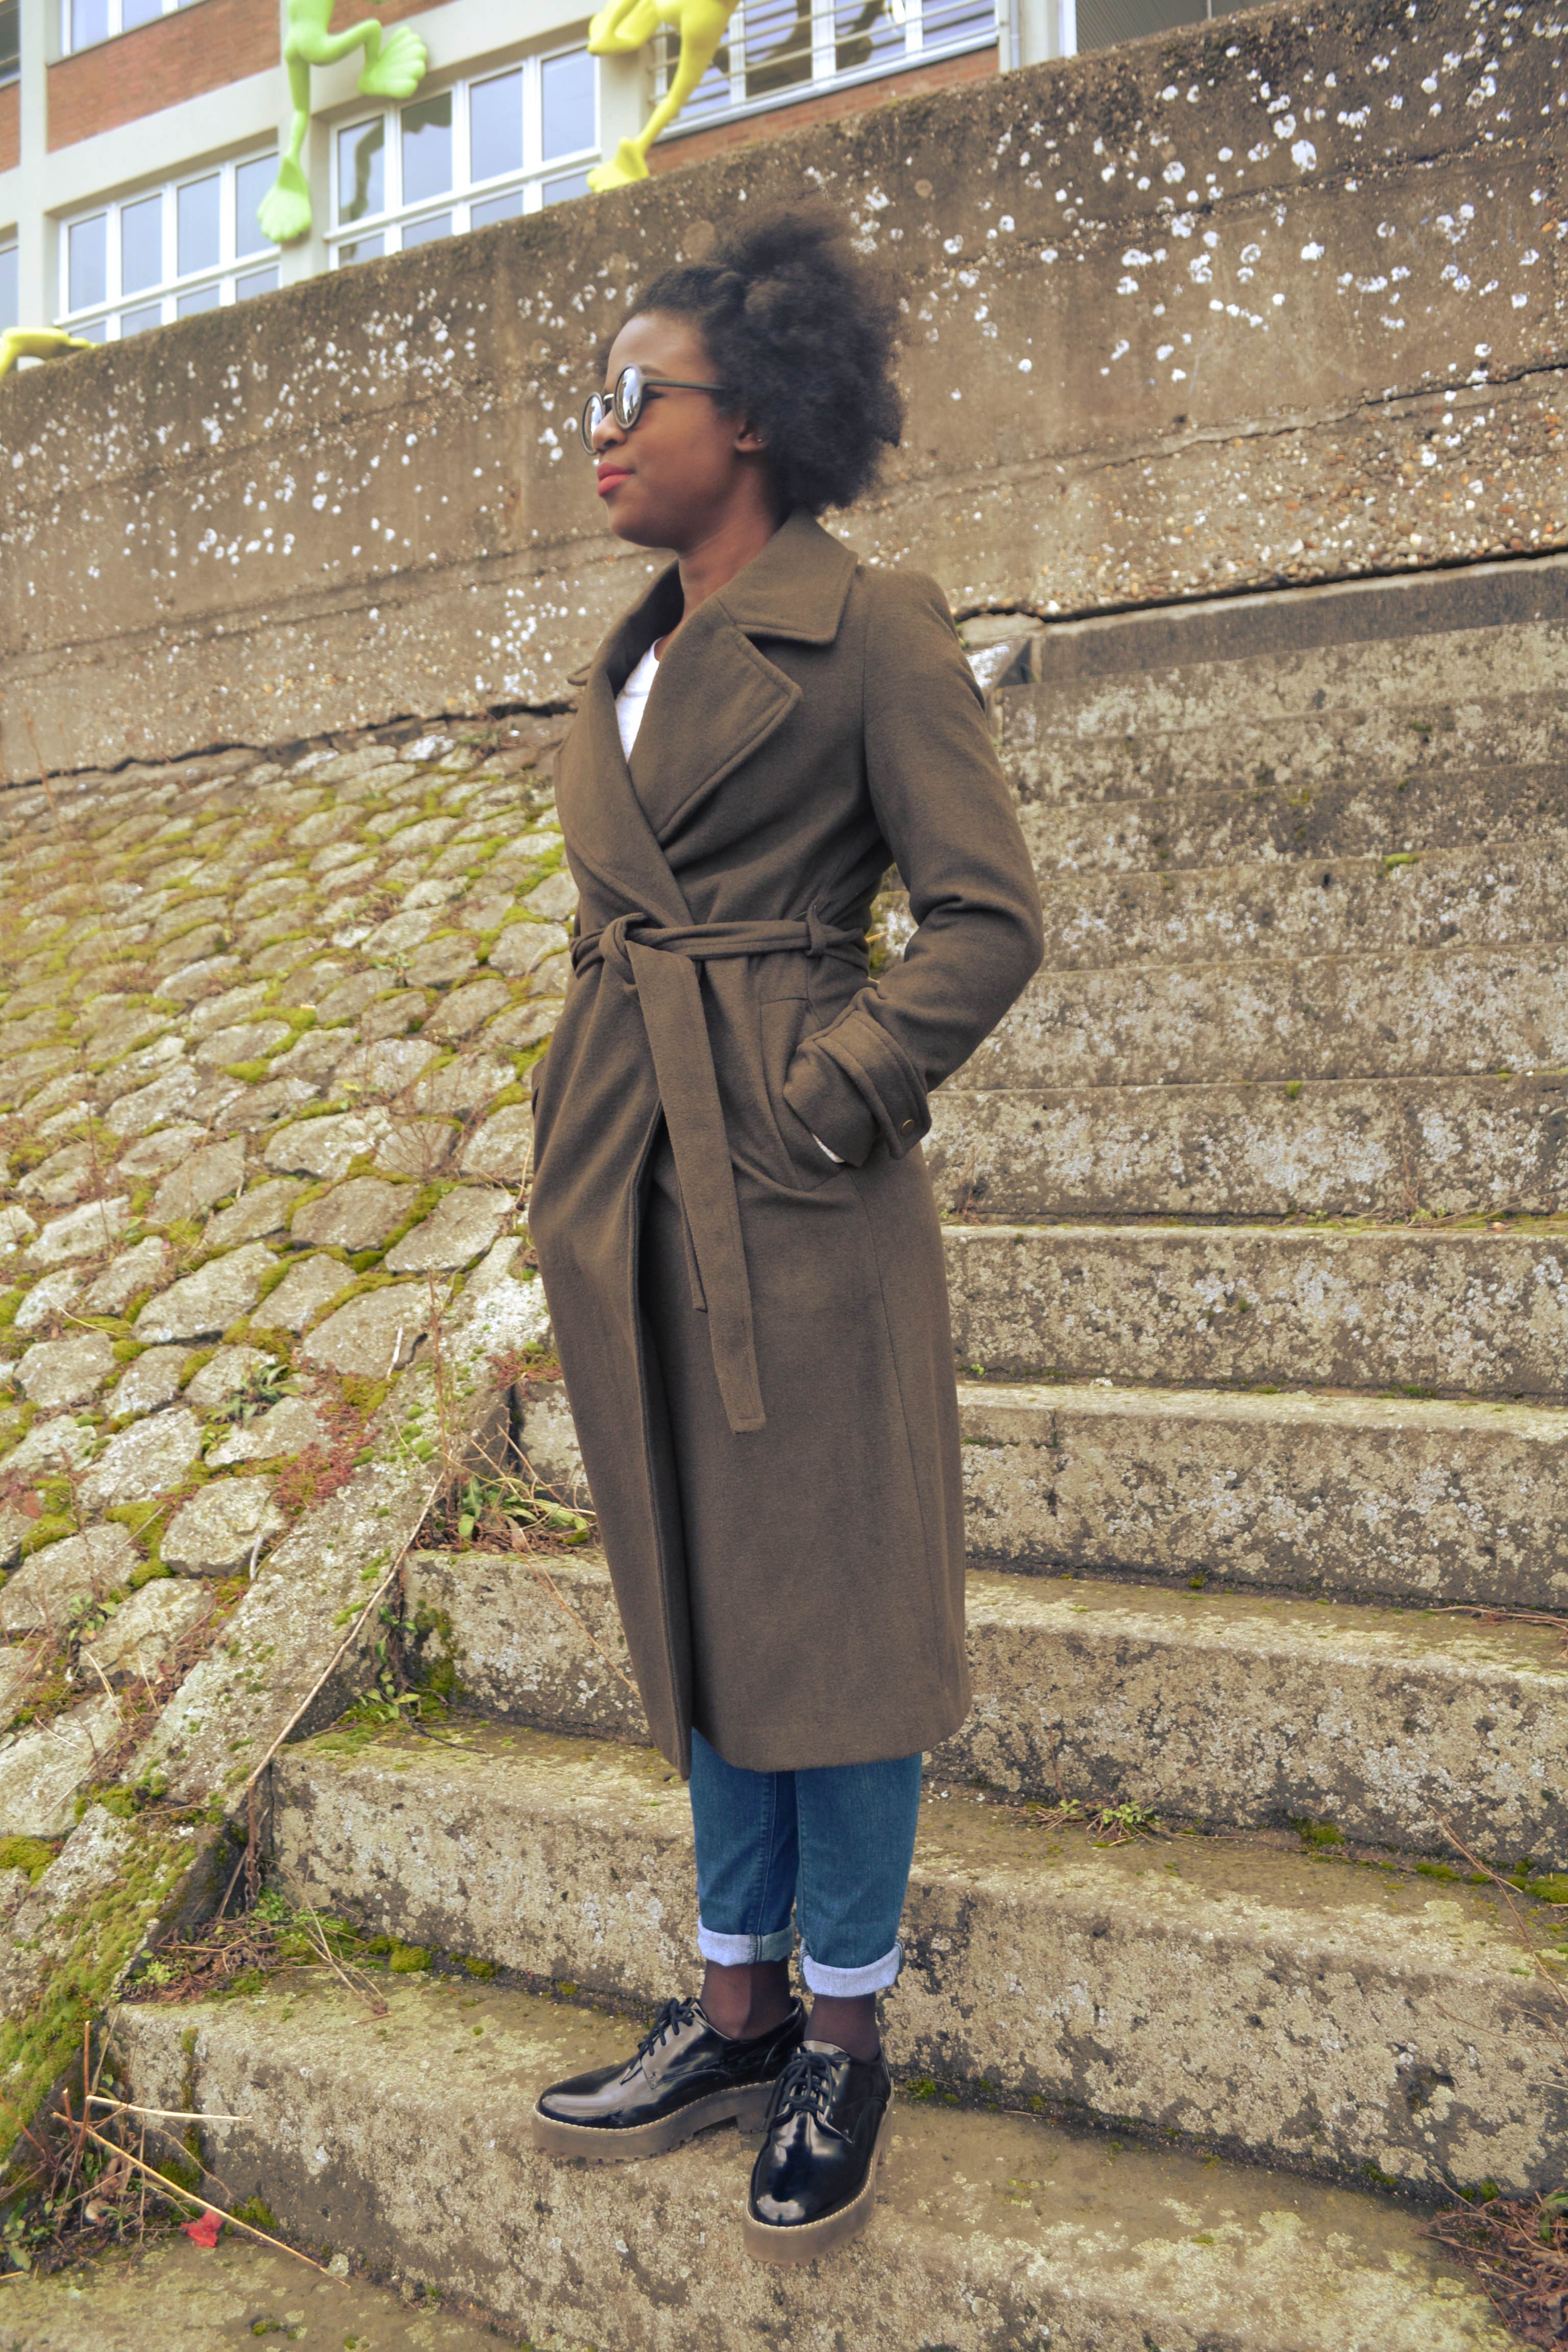 A woman is standing on outdoor steps with her hands in coat pockets